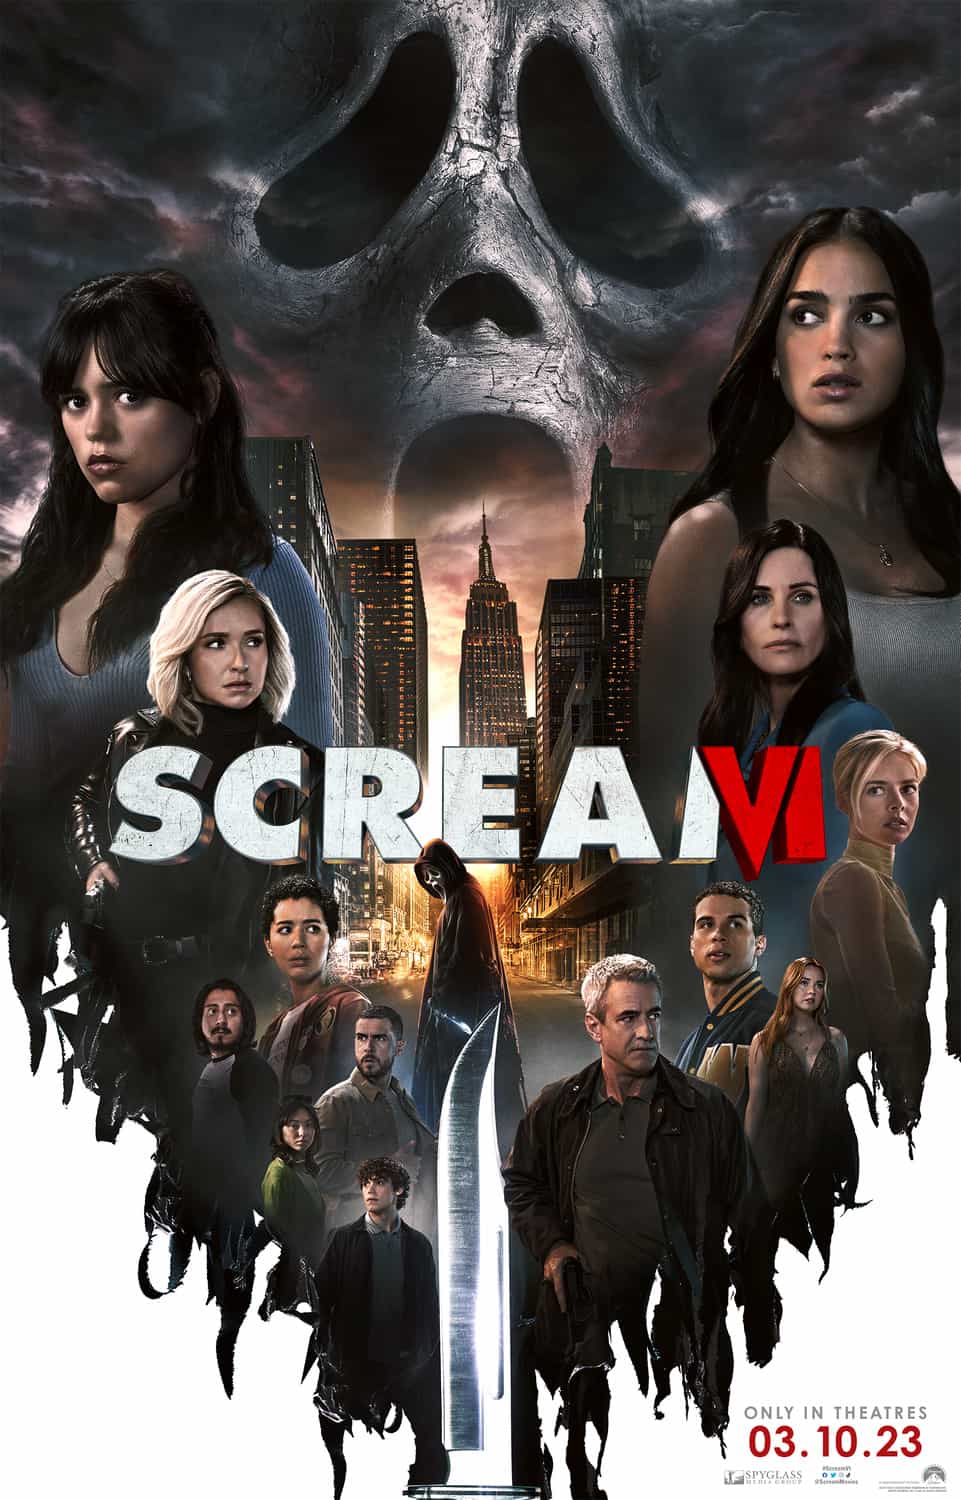 A new trailer and poster released for Scream VI starring Melissa Barrera - movie UK release date 31st March 2023 #screamvi